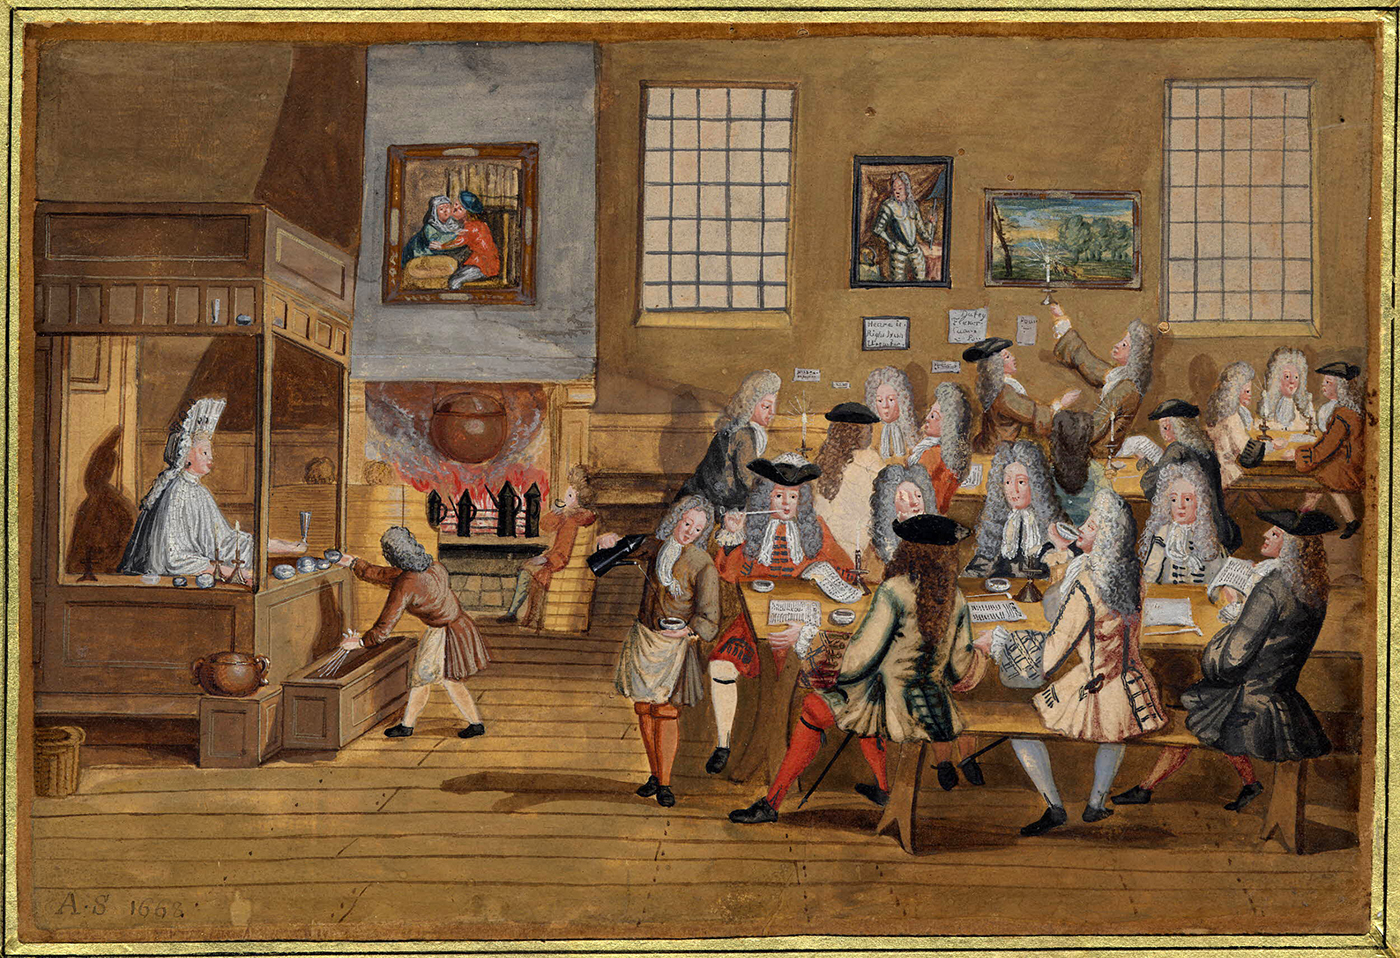 From Sip to Thought: The Impact of Coffee Houses on 17th-Century European Intellectuals